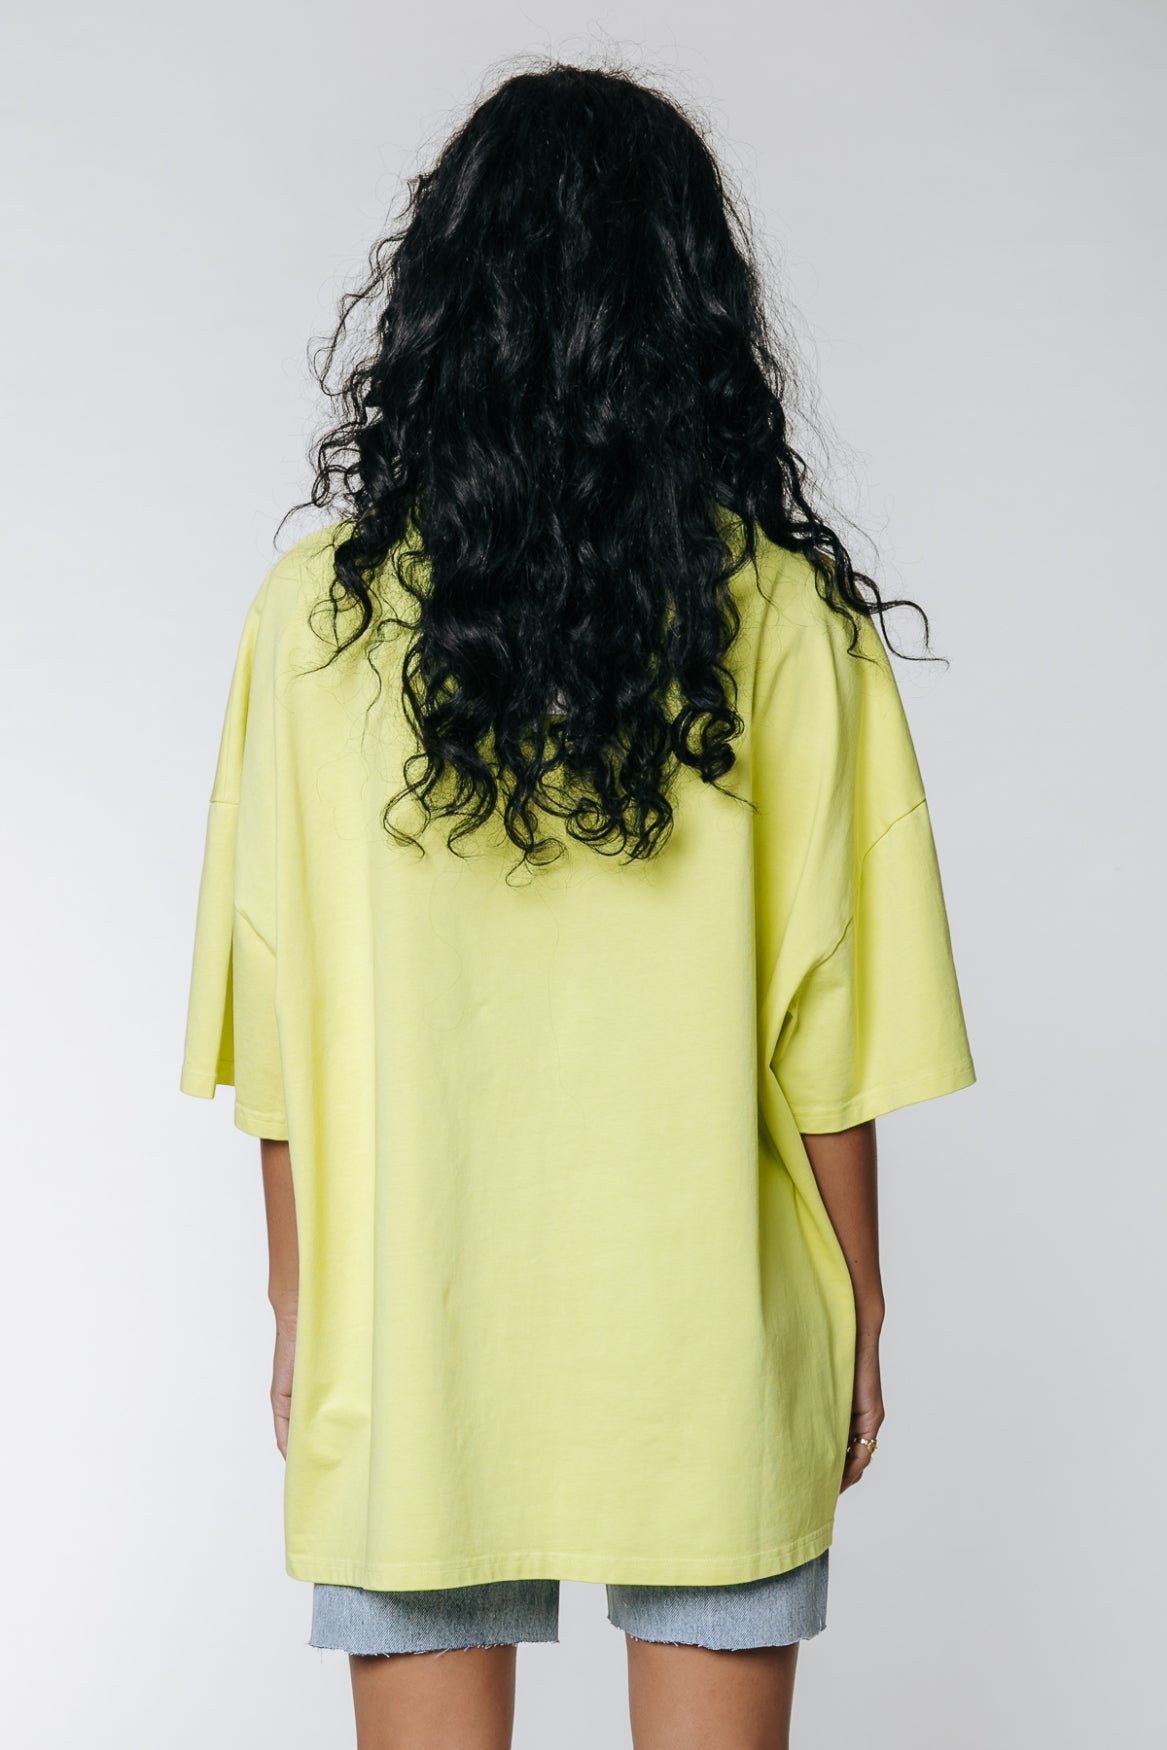 Colourful Rebel Oversized Tee | Bright lime